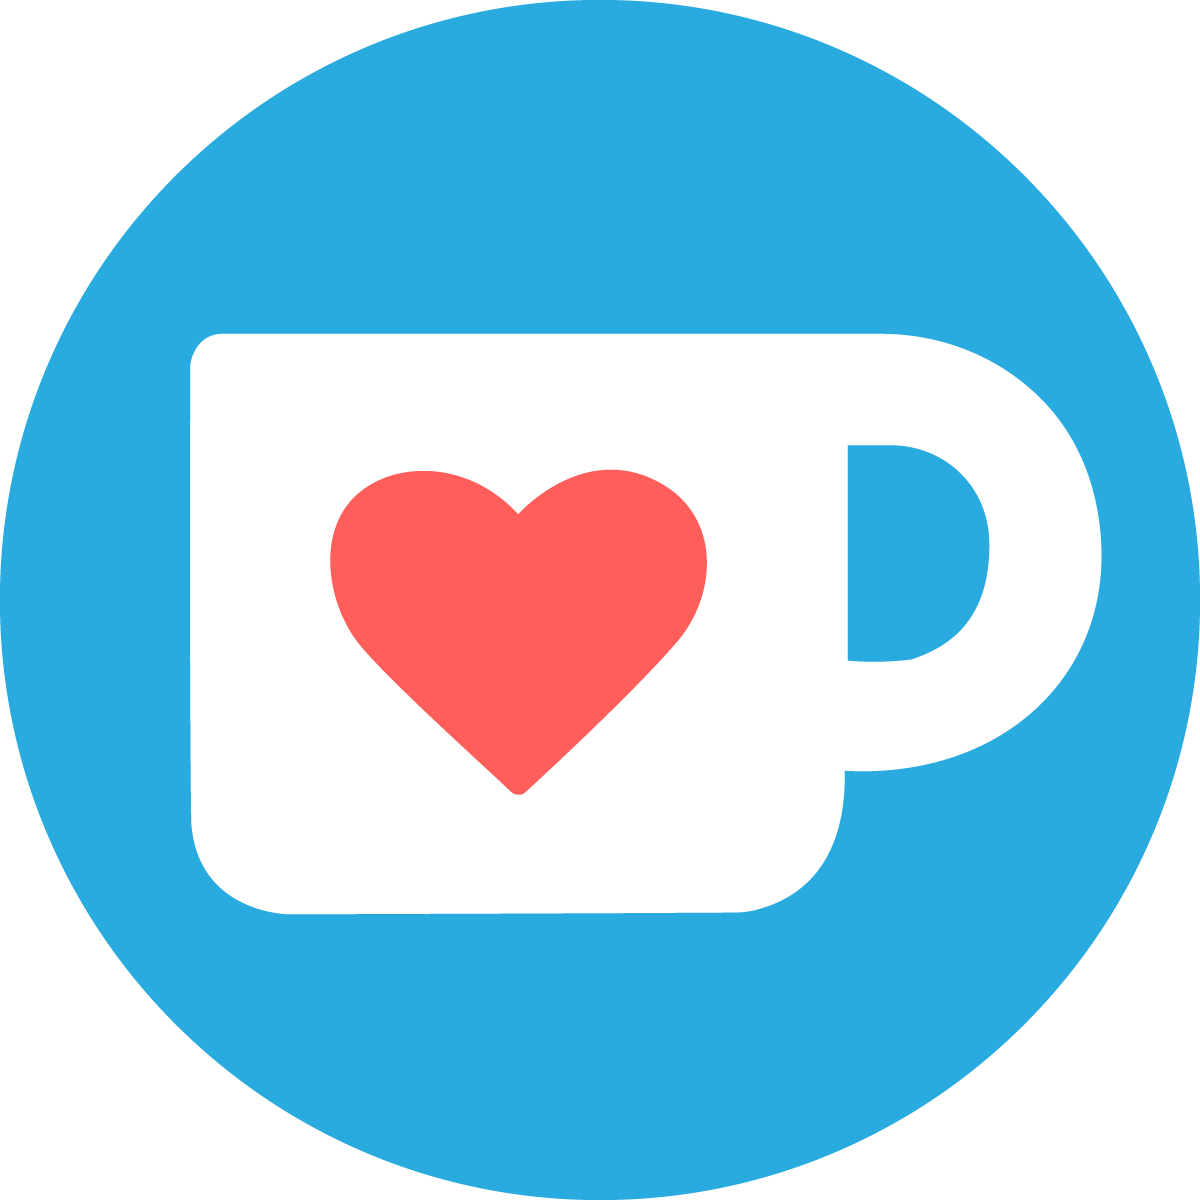 Ko-fi Supporter! - Aldorous's Ko-fi Shop - Ko-fi ❤️ Where creators get  support from fans through donations, memberships, shop sales and more! The  original 'Buy Me a Coffee' Page.